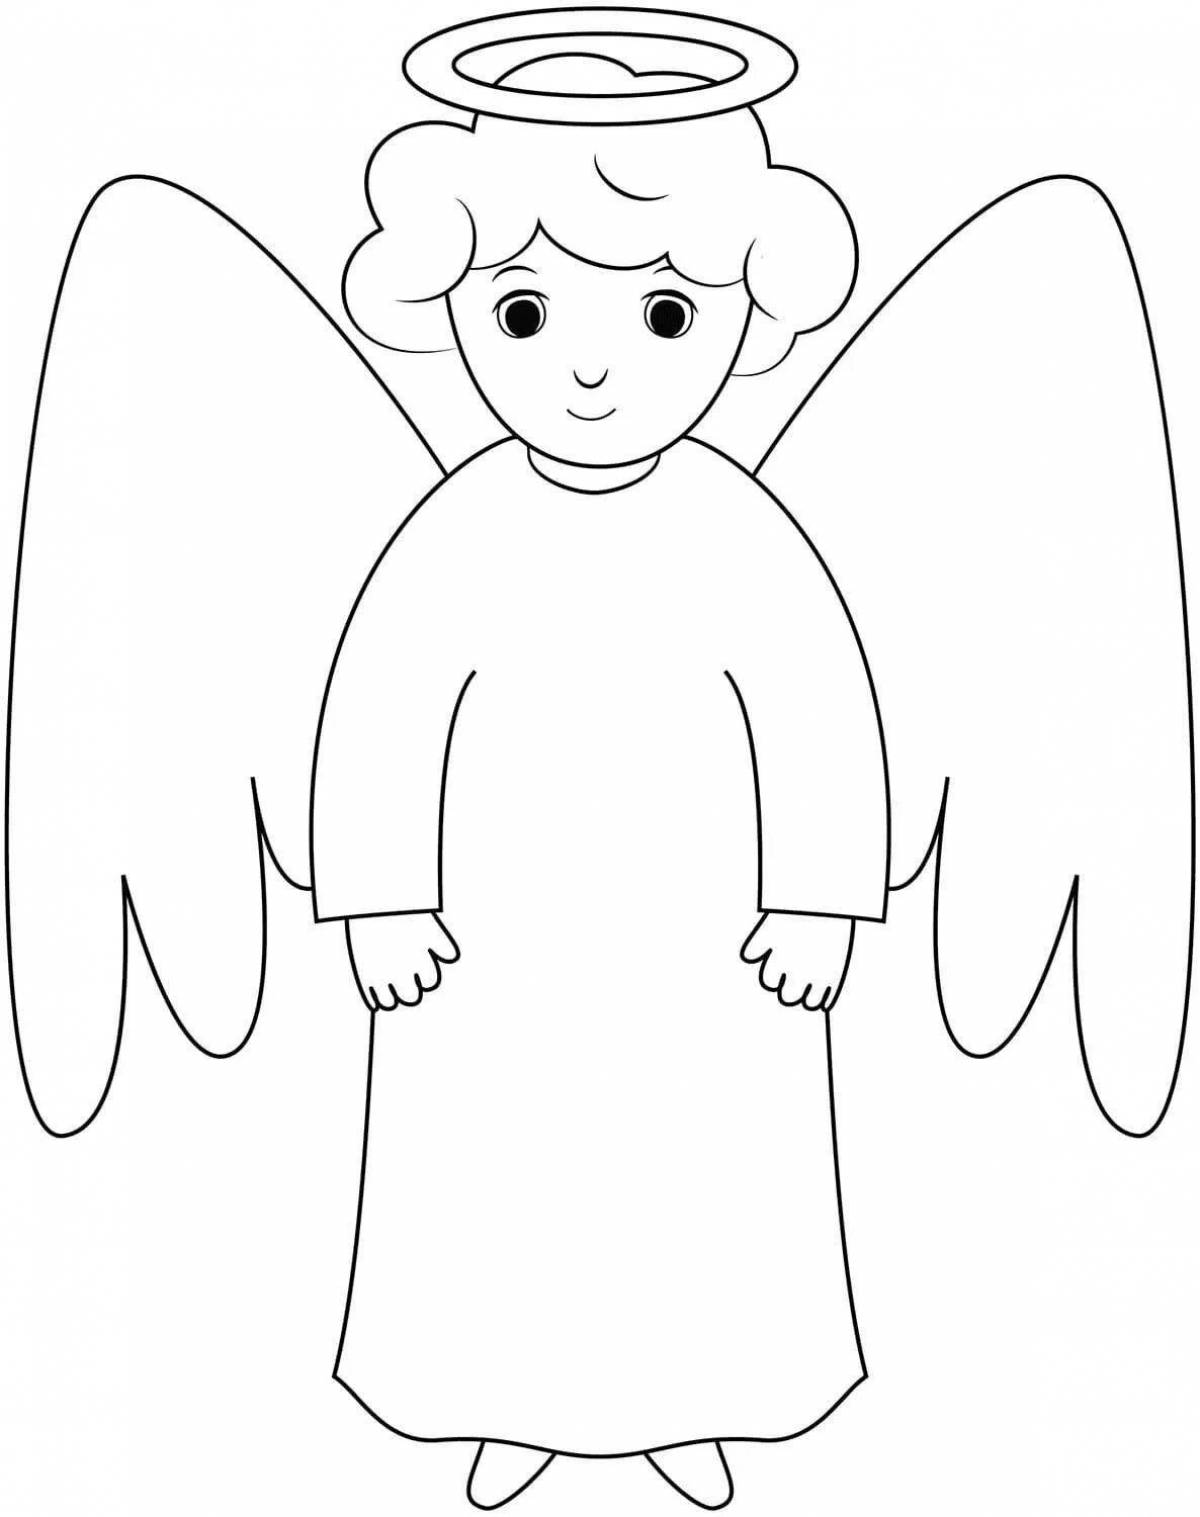 Peaceful angel coloring book for 3-4 year olds